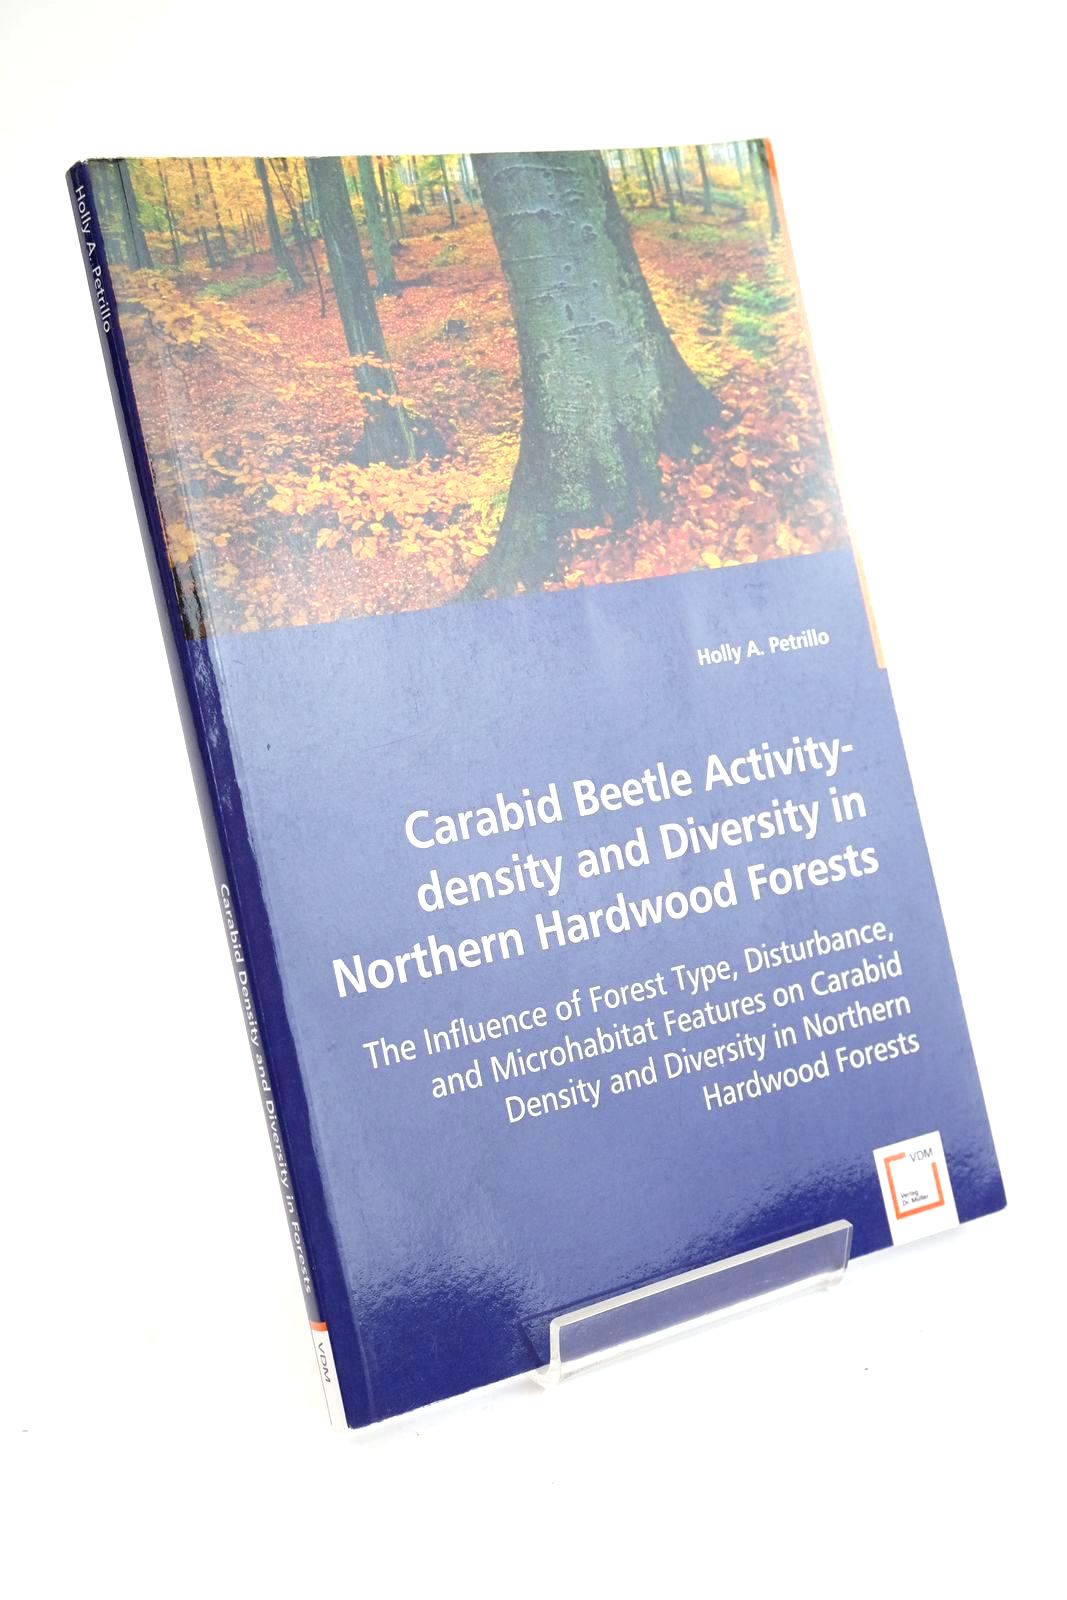 Photo of CARABID BEETLE ACTIVITY-DENSITY AND DIVERSITY IN NORTHERN HARDWOOD FORESTS written by Petrillo, Holly A. published by Vdm Verlag (STOCK CODE: 1324011)  for sale by Stella & Rose's Books